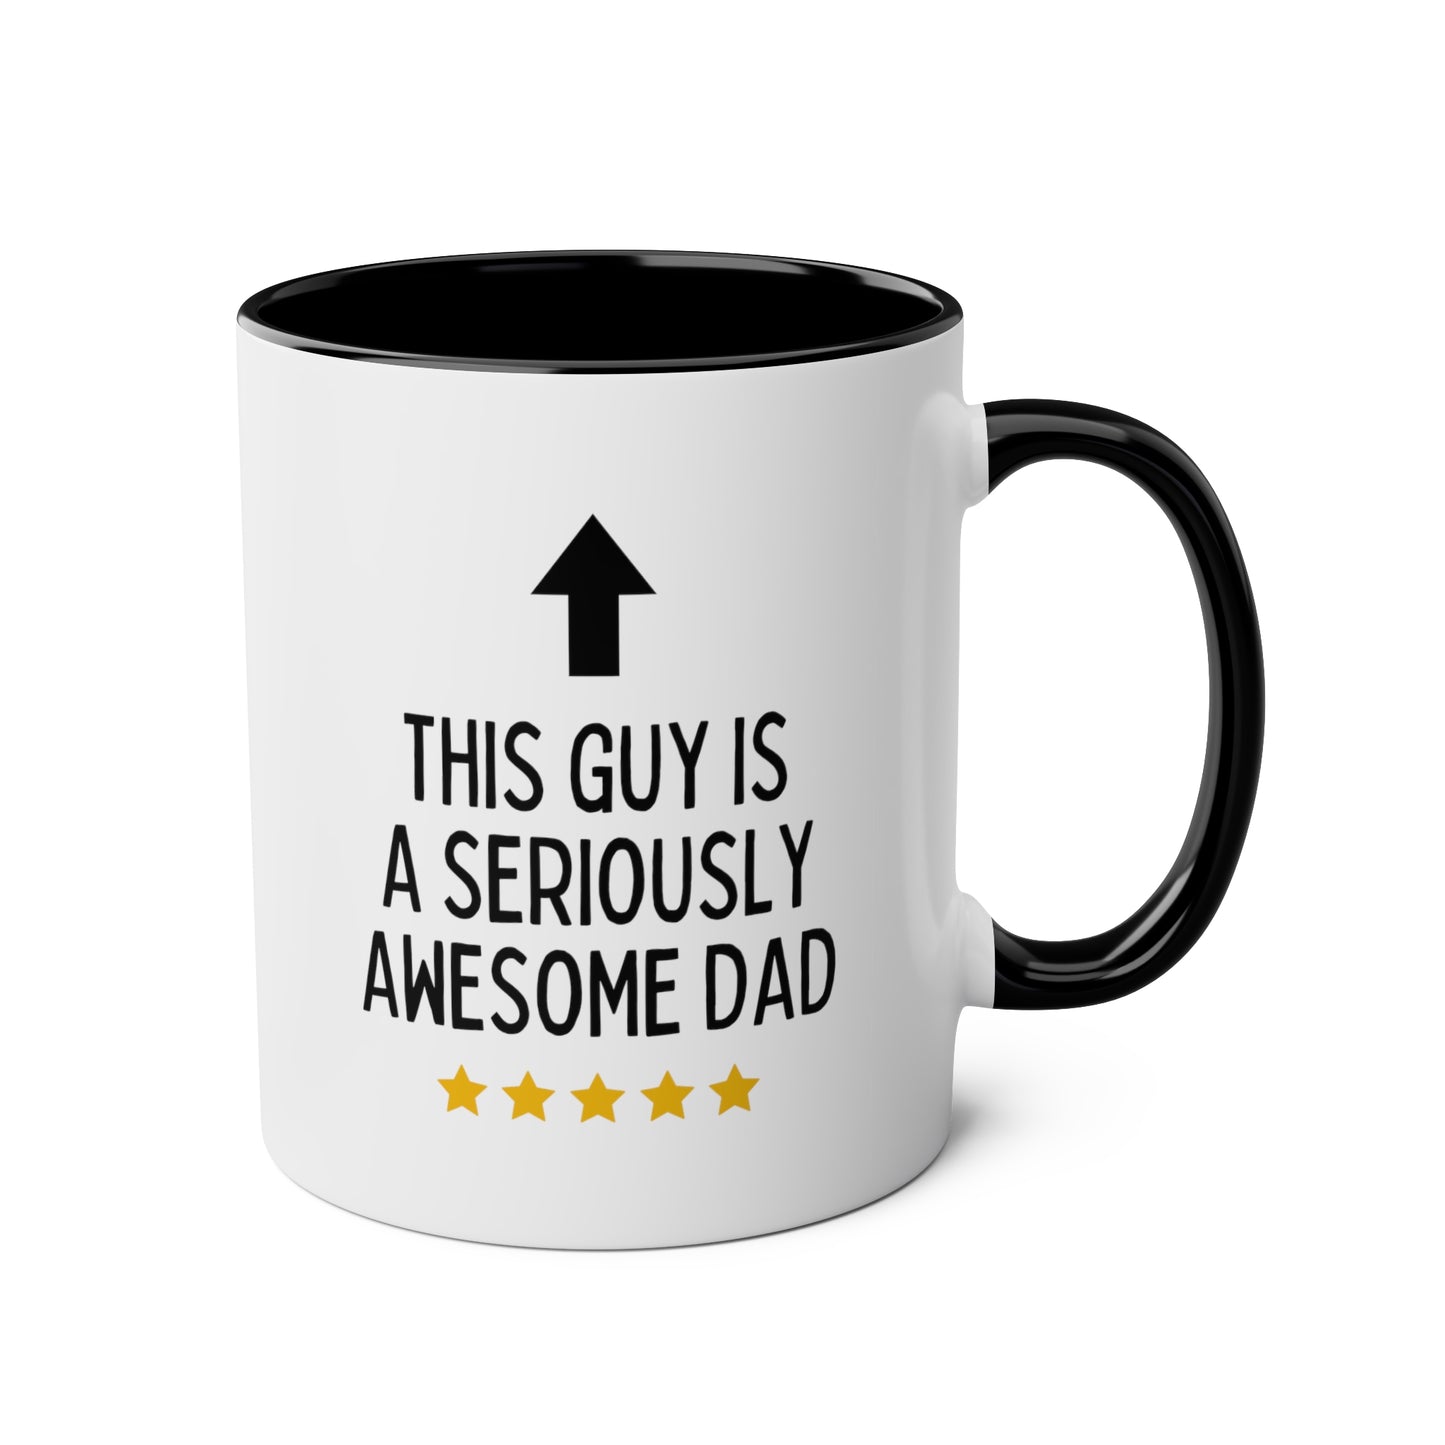 This Guy Is One Awesome Dad 11oz white with black accent funny large coffee mug gift for best papa father father's day grandfather waveywares wavey wares wavywares wavy wares